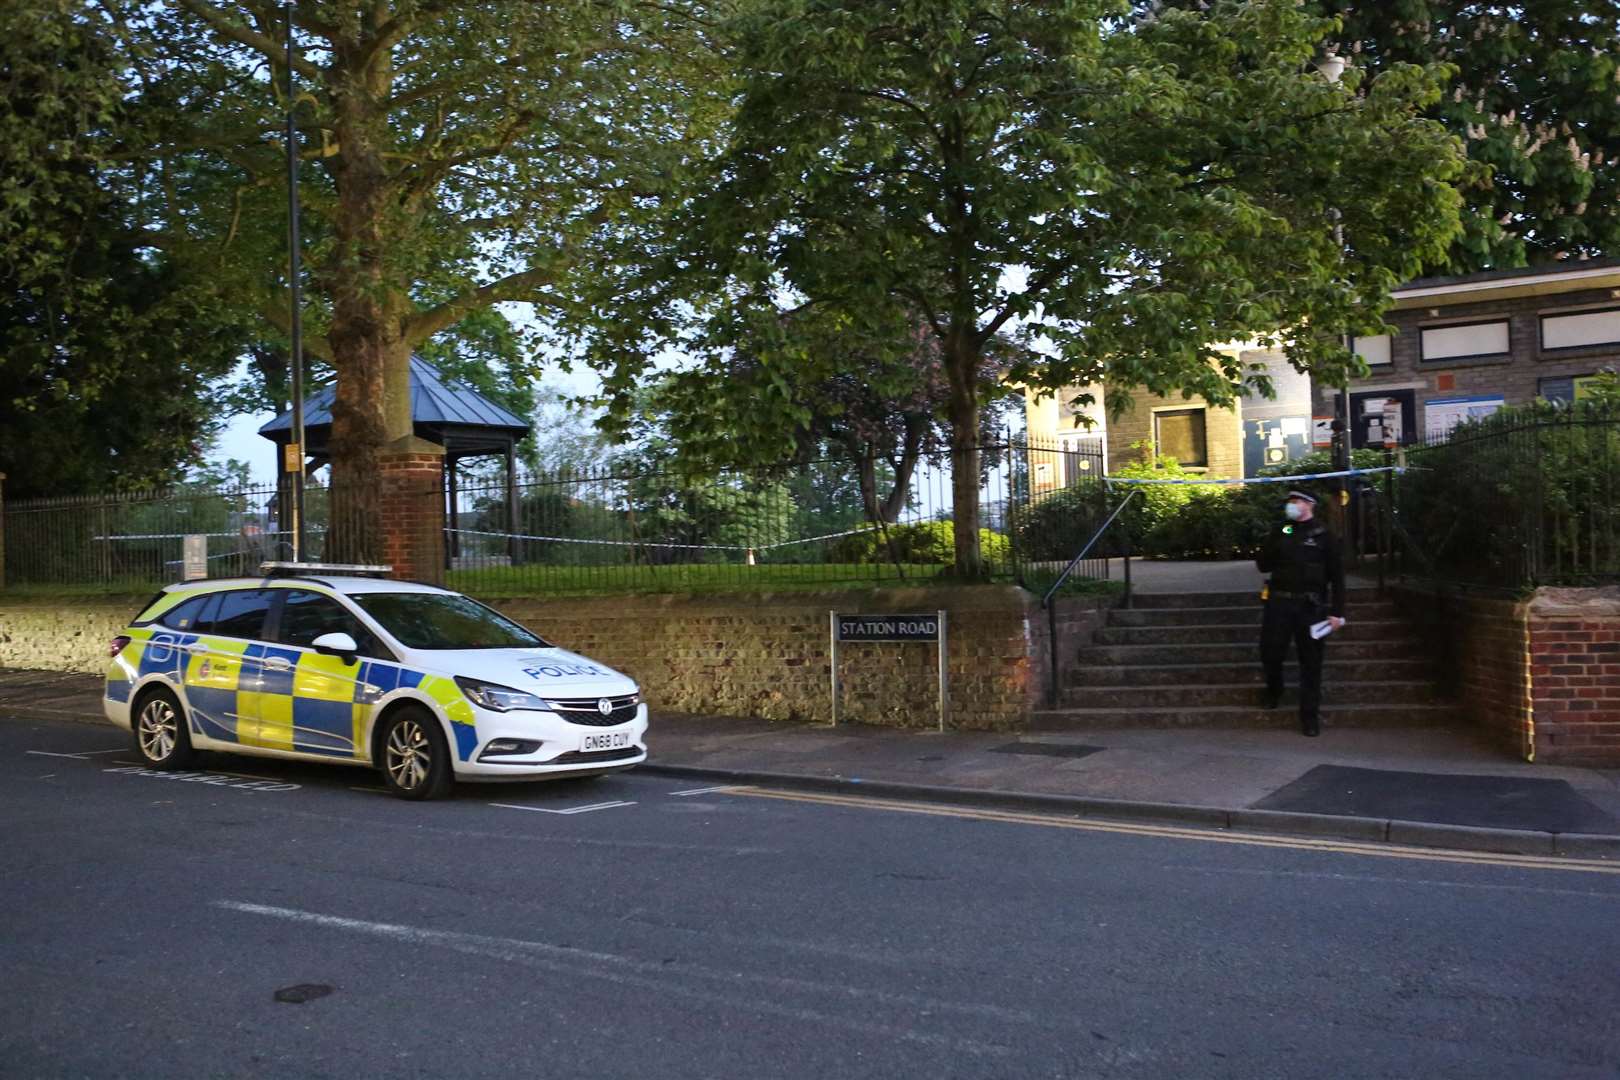 A crime scene was set up in Brenchley Gardens, Maidstone, after an Uber Eats driver stamped on a nearby business owners head last year